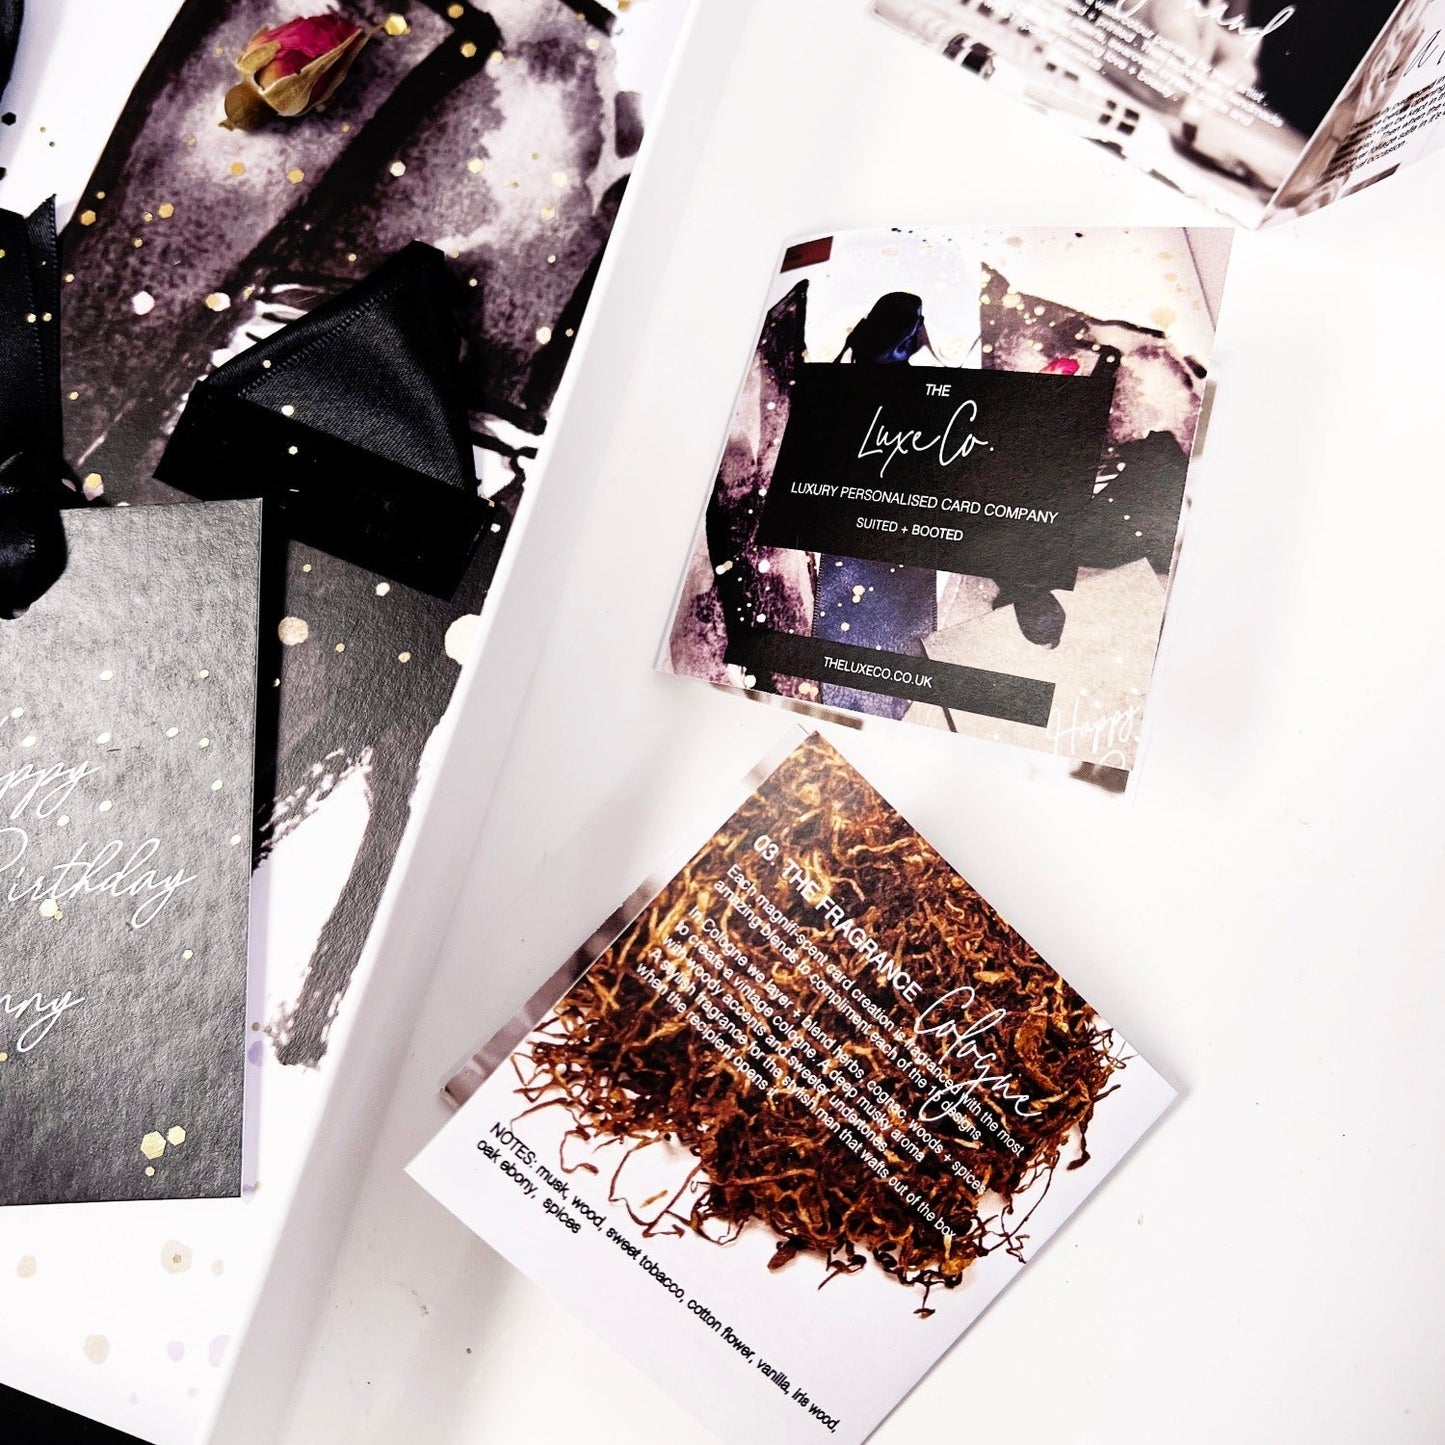 Handmade scented cards for him to match the Pour Homme candle for him - because men like candles too